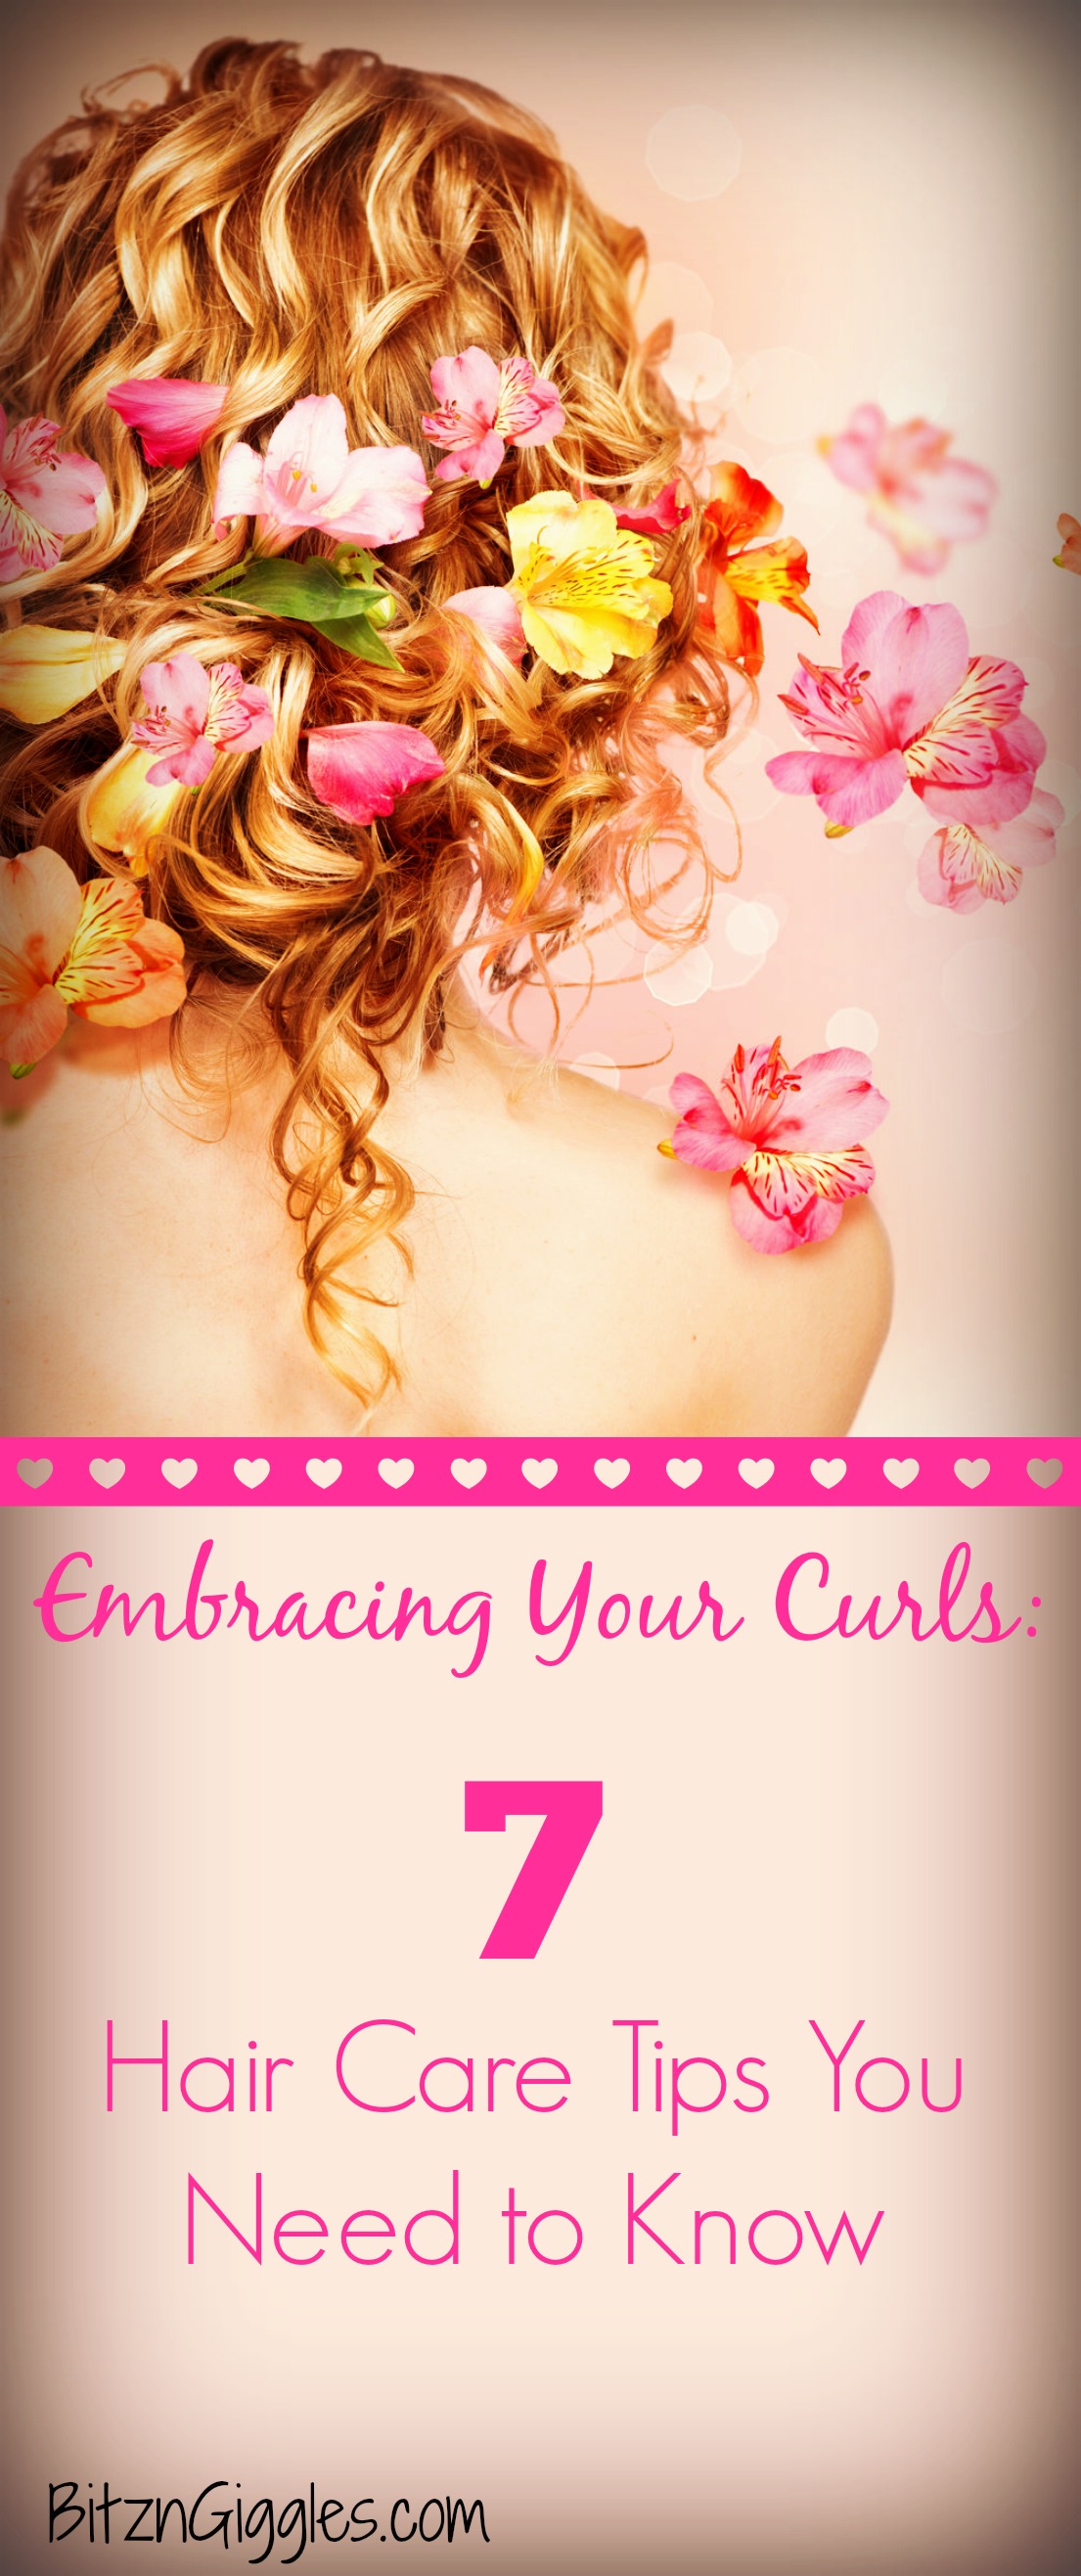 Embracing Your Curls: 7 Hair Care Tips You Need to Know - Learn to love your curls through proper care!